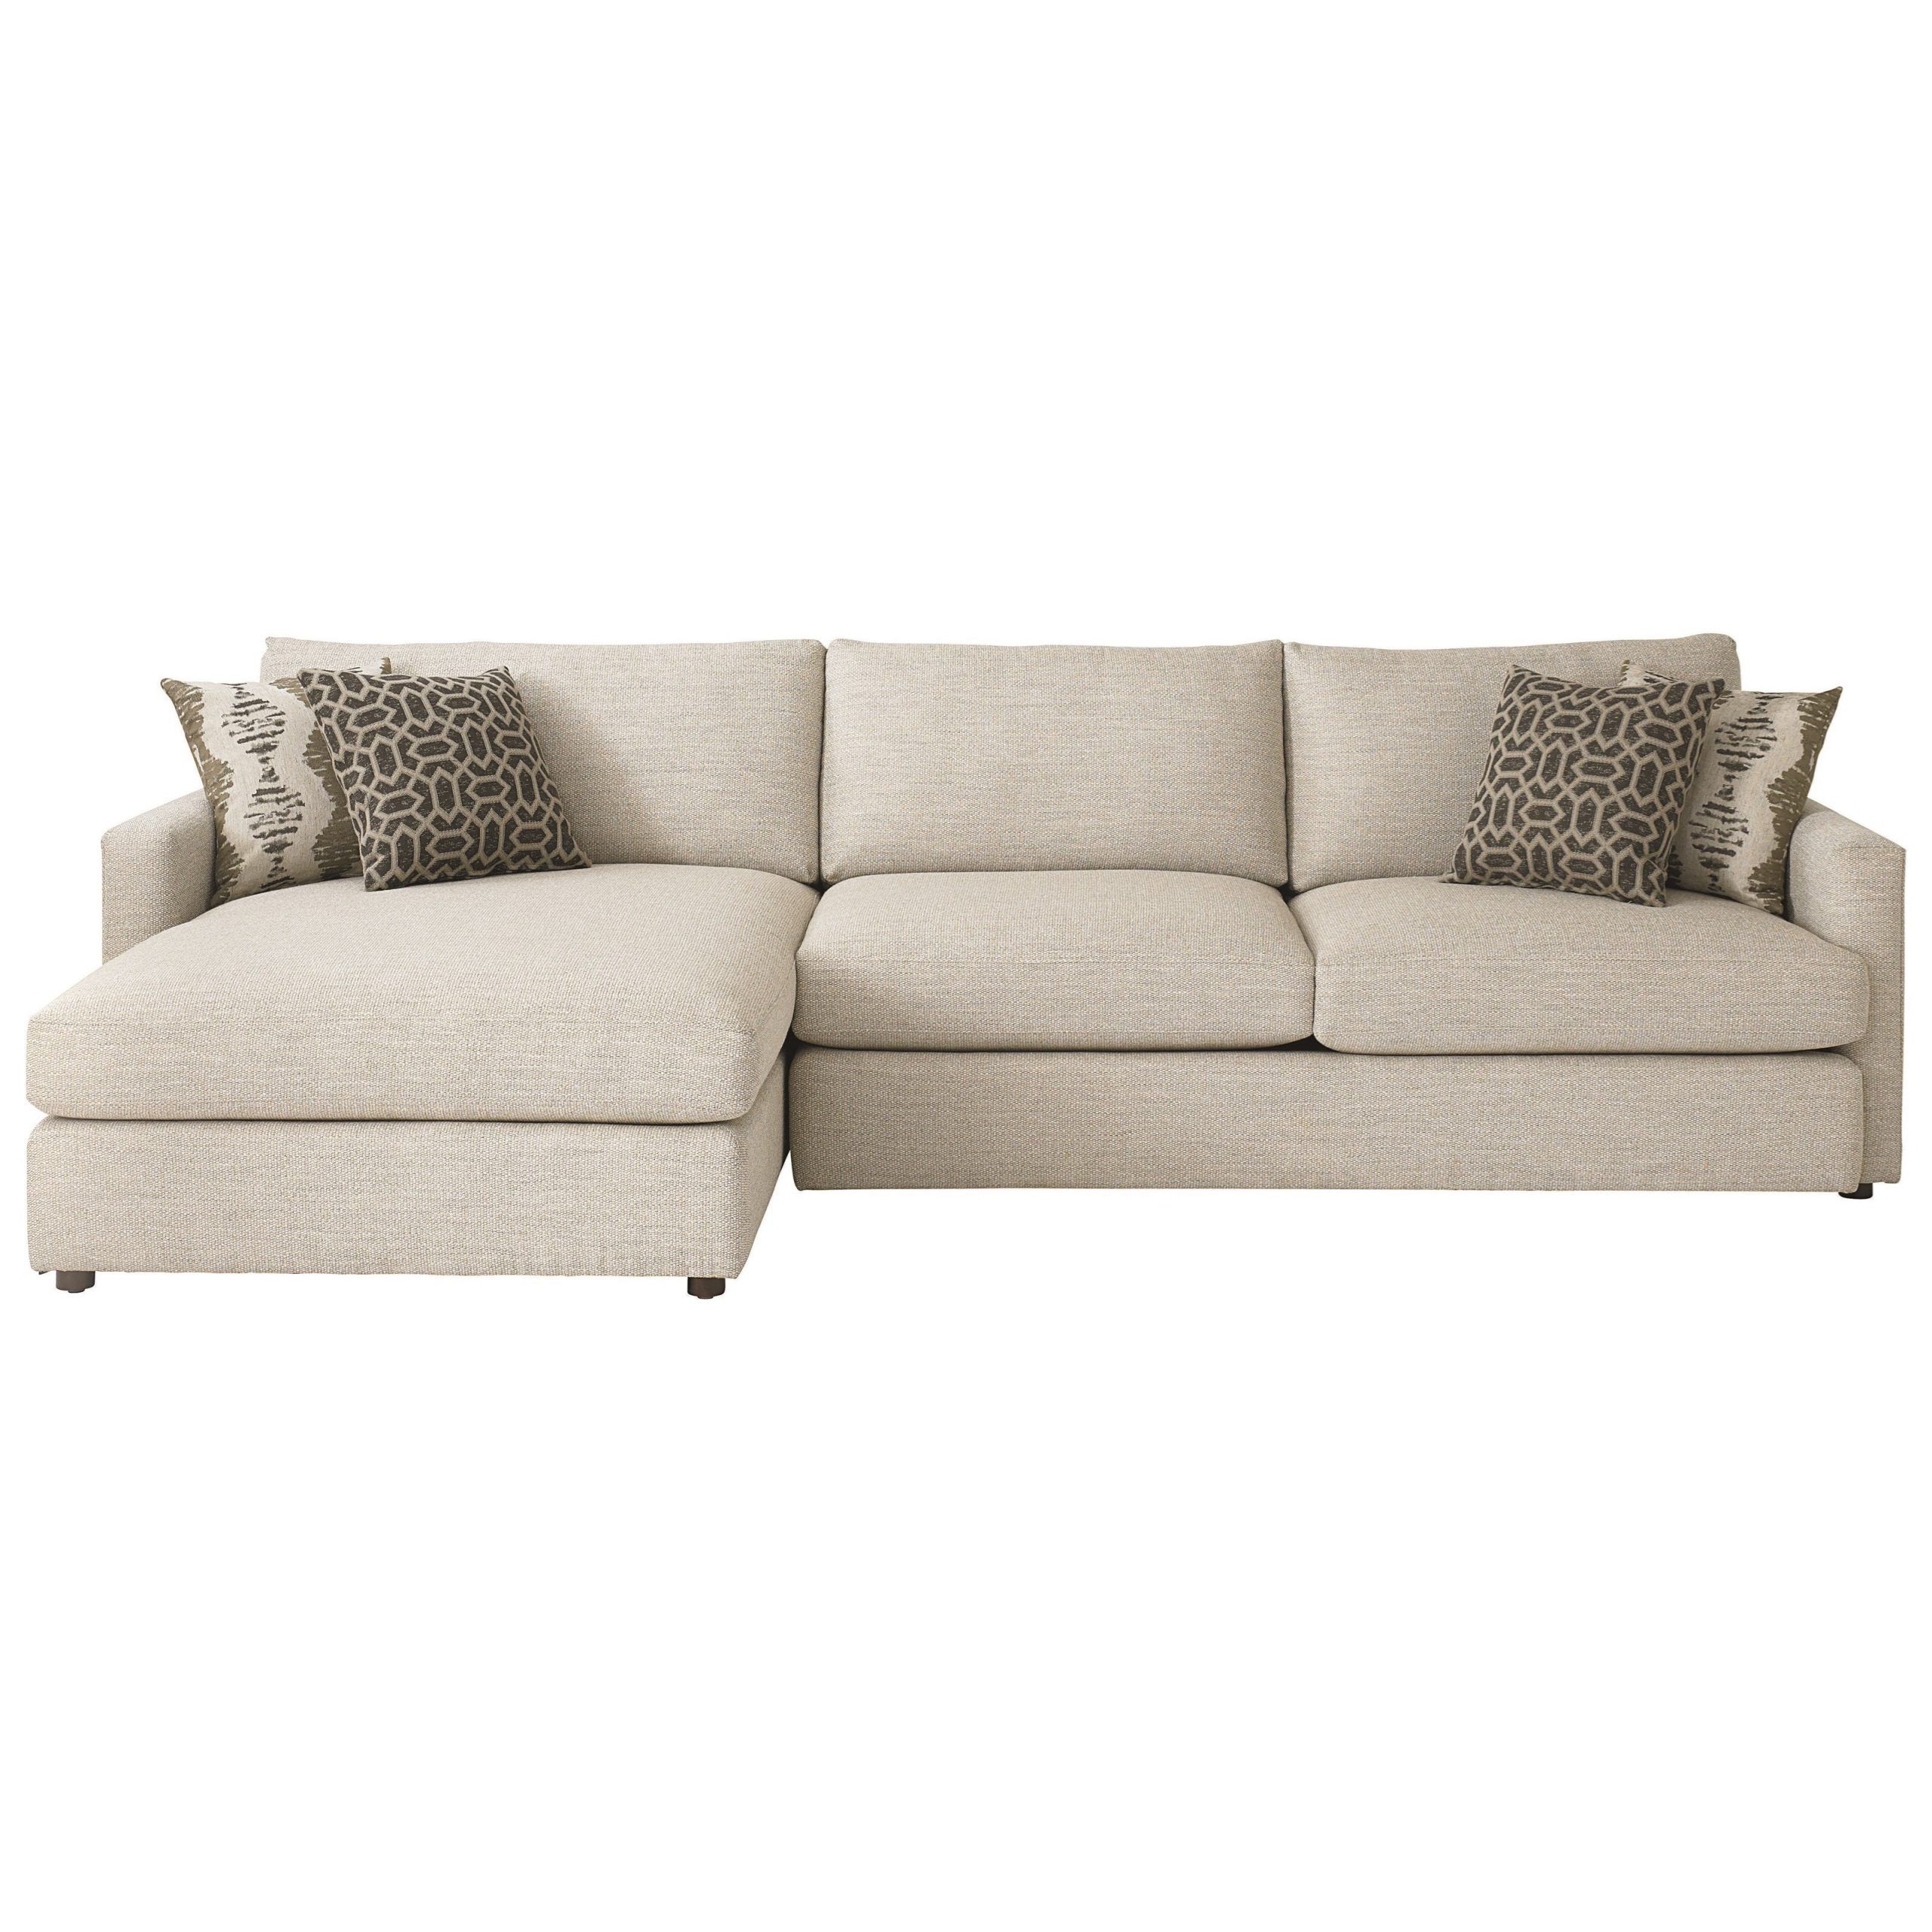 Bassett Allure Contemporary Sectional With Left Arm Facing Intended For Hannah Left Sectional Sofas (View 7 of 15)